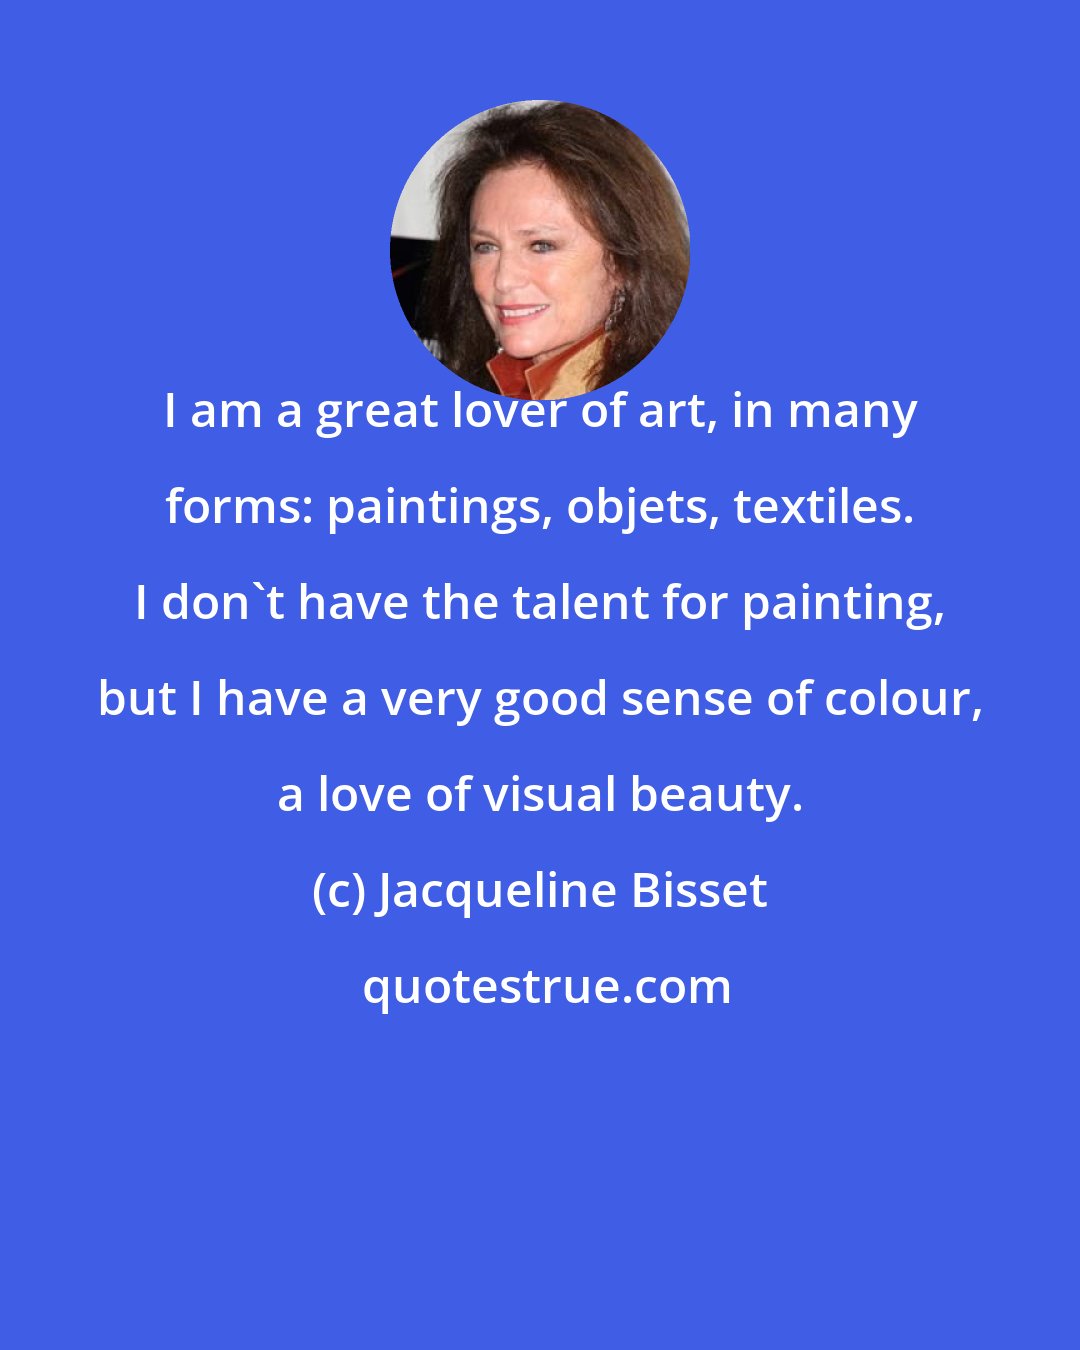 Jacqueline Bisset: I am a great lover of art, in many forms: paintings, objets, textiles. I don't have the talent for painting, but I have a very good sense of colour, a love of visual beauty.